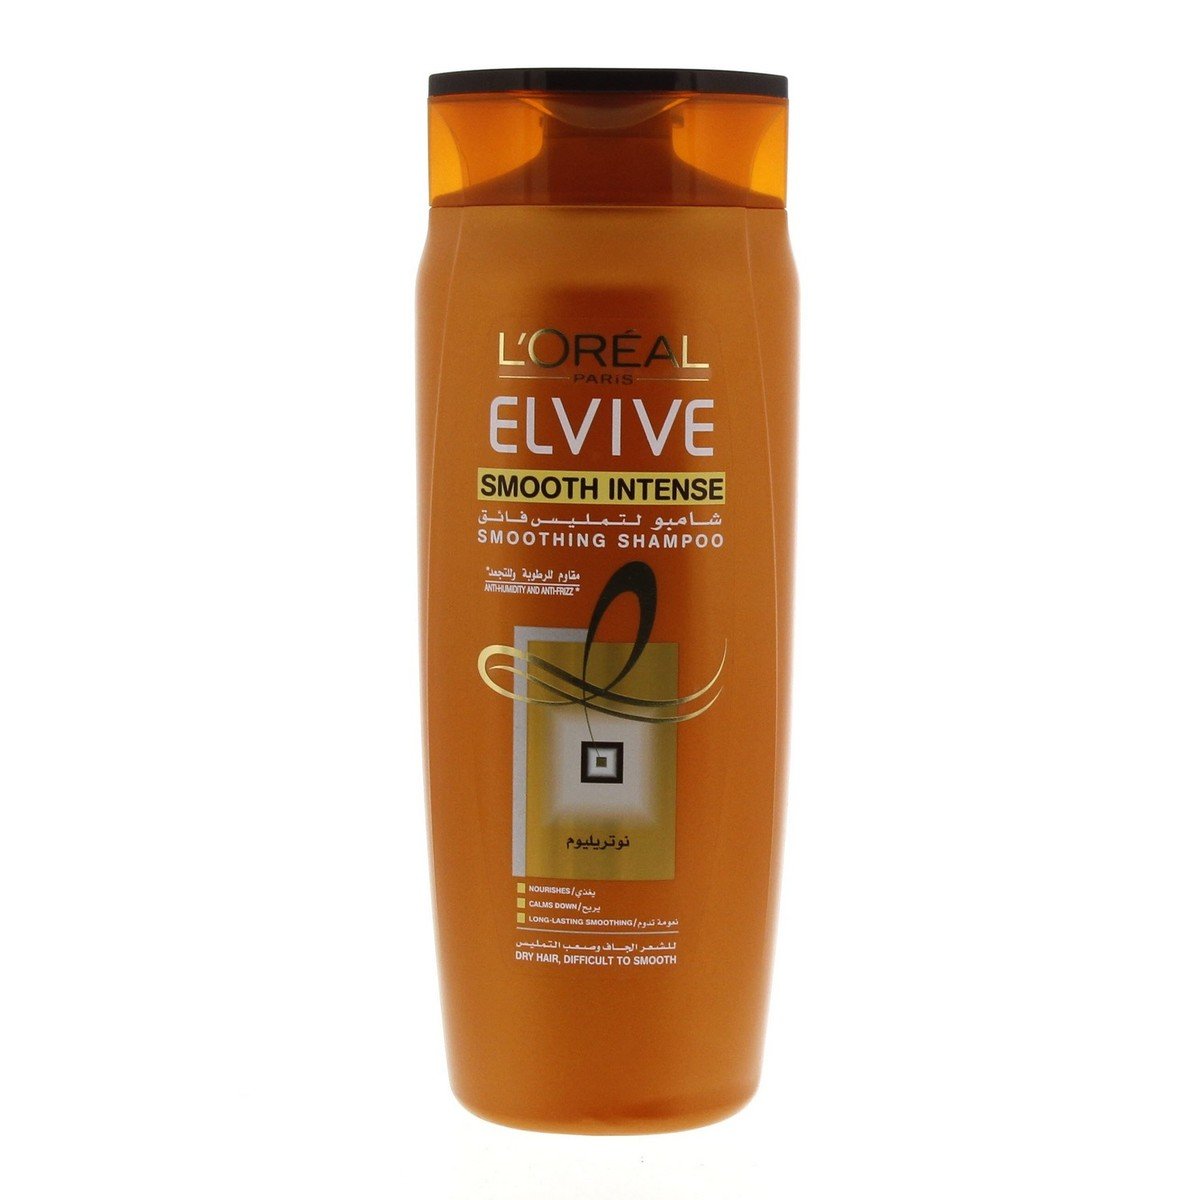 L'Oreal Elvive Shampoo Smooth Intense Difficult to Smooth 700 ml